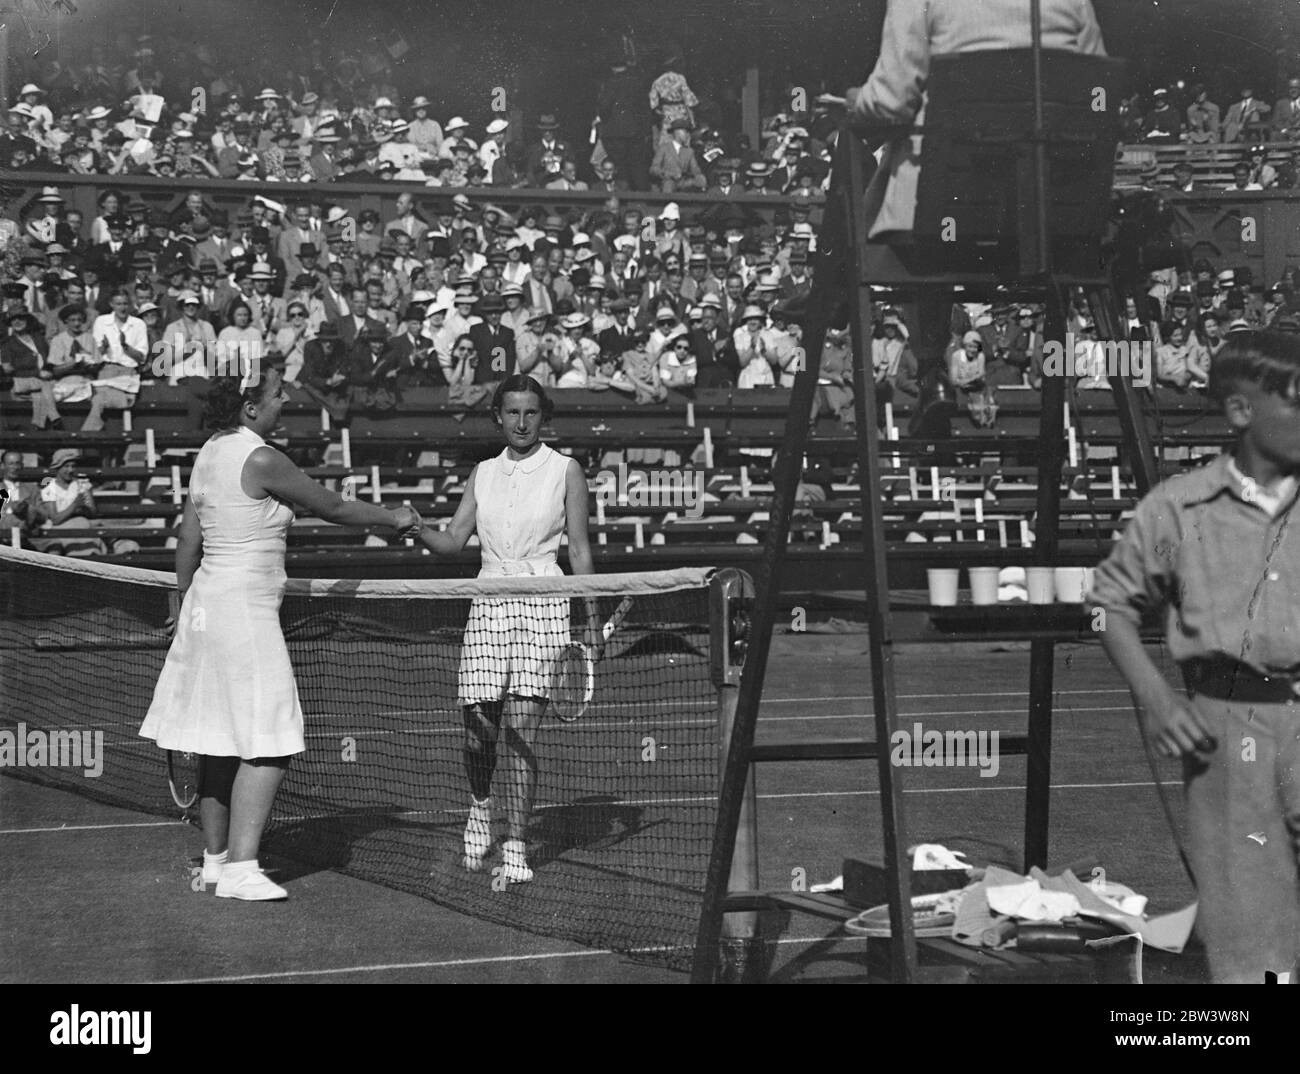 Dorothy Round Defeats Betty Nuthall In Women ' s Singles At WimbledonTennis Championships . Miss Dorothy Round had her first success in her bid to regain her Wimbledon title when she defeated Miss Betty Nuthall 9 - 7 , 6 - 3 in first round of the women singles at Wimbledon . Photo Shows : Dorothy Round being congratulated by Betty Nuthall after the match on the Centre Court . 23 Jun 1936 Stock Photo